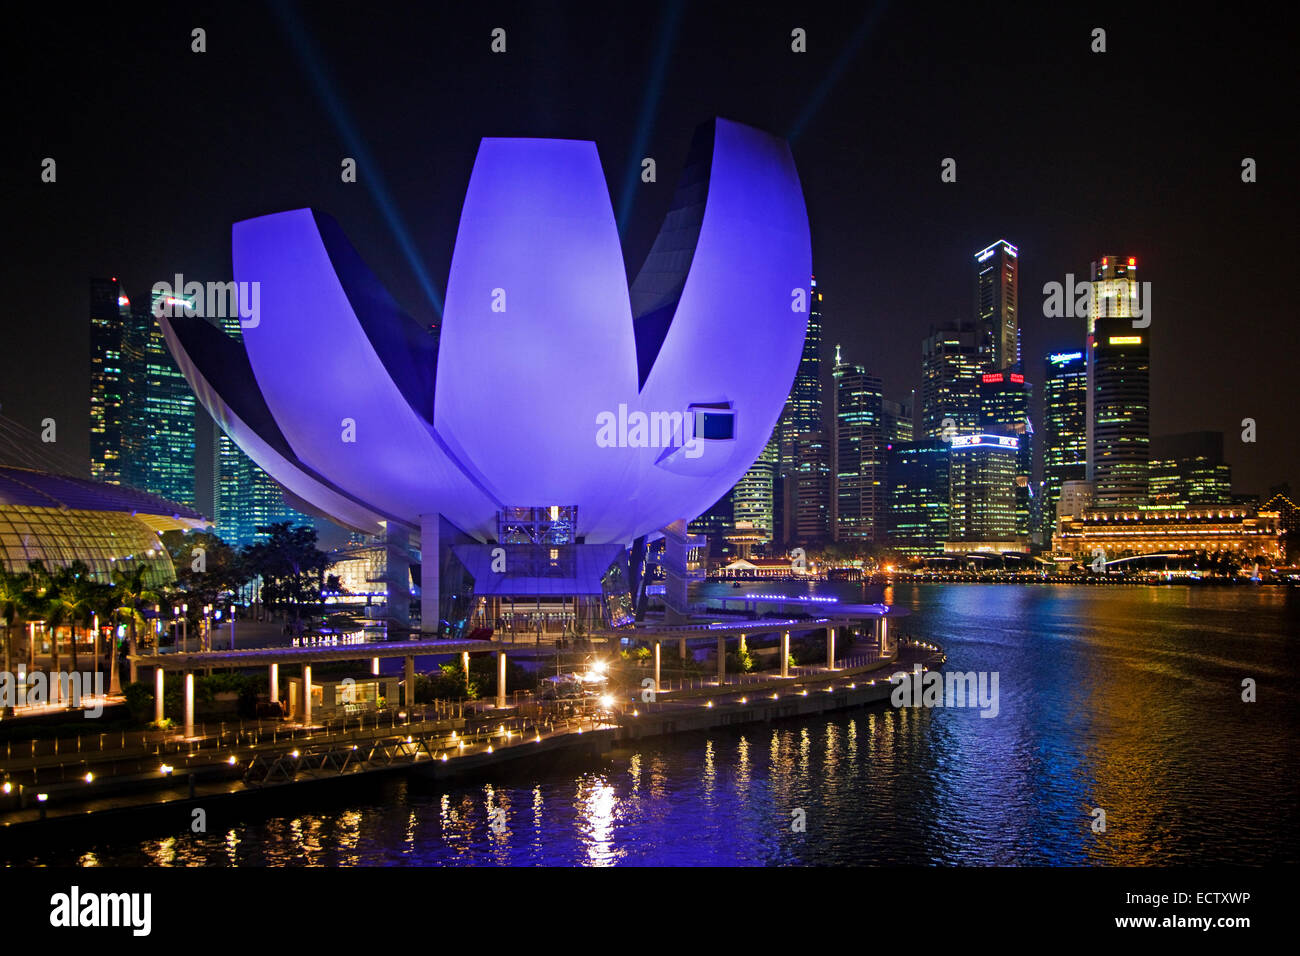 The purple illuminated ArtScience Museum and skyline with skyscrapers and high-rise buildings in Singapore at night Stock Photo